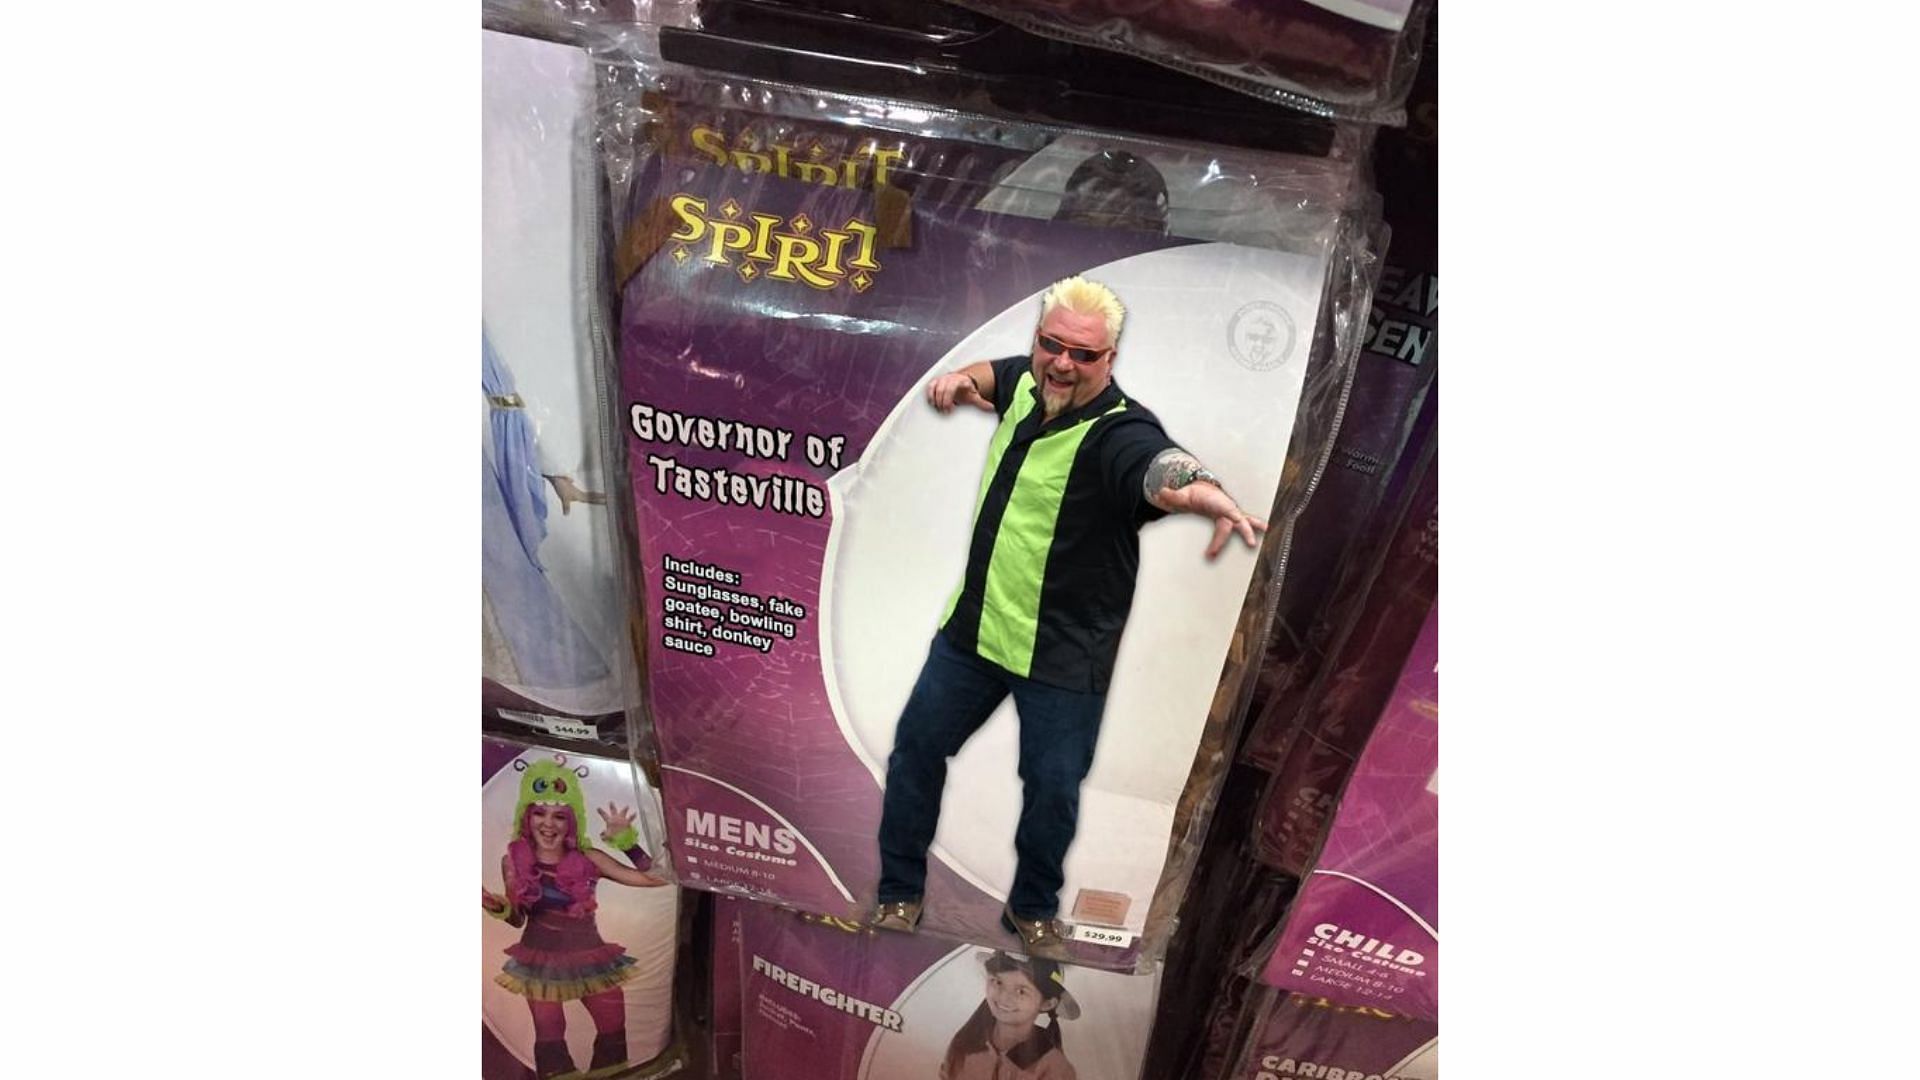 Photoshopped costume first began with this Guy Fieri one (image via knowyourmeme.com)